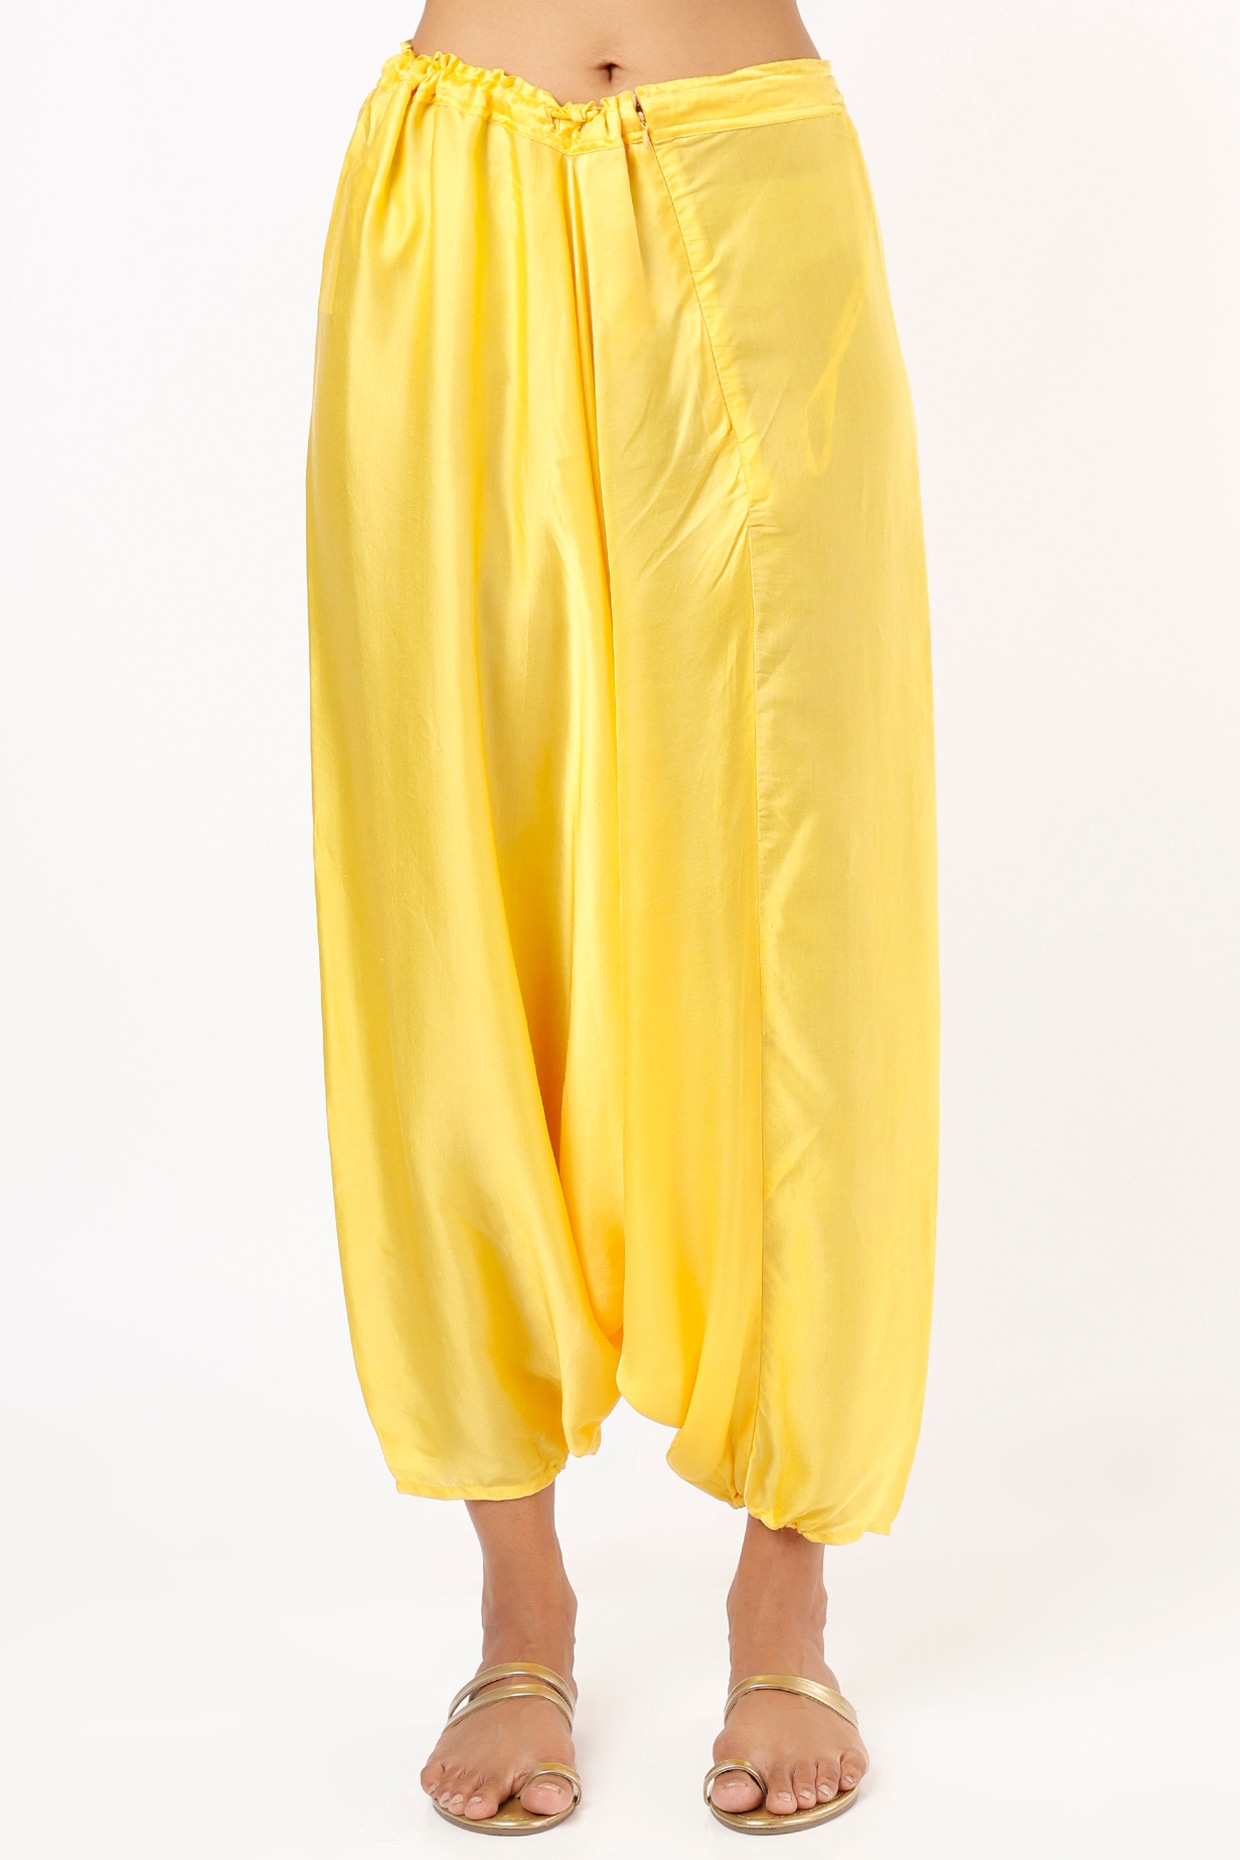 Chiccy Pants  Yellow  Carrot pants  Trendyol